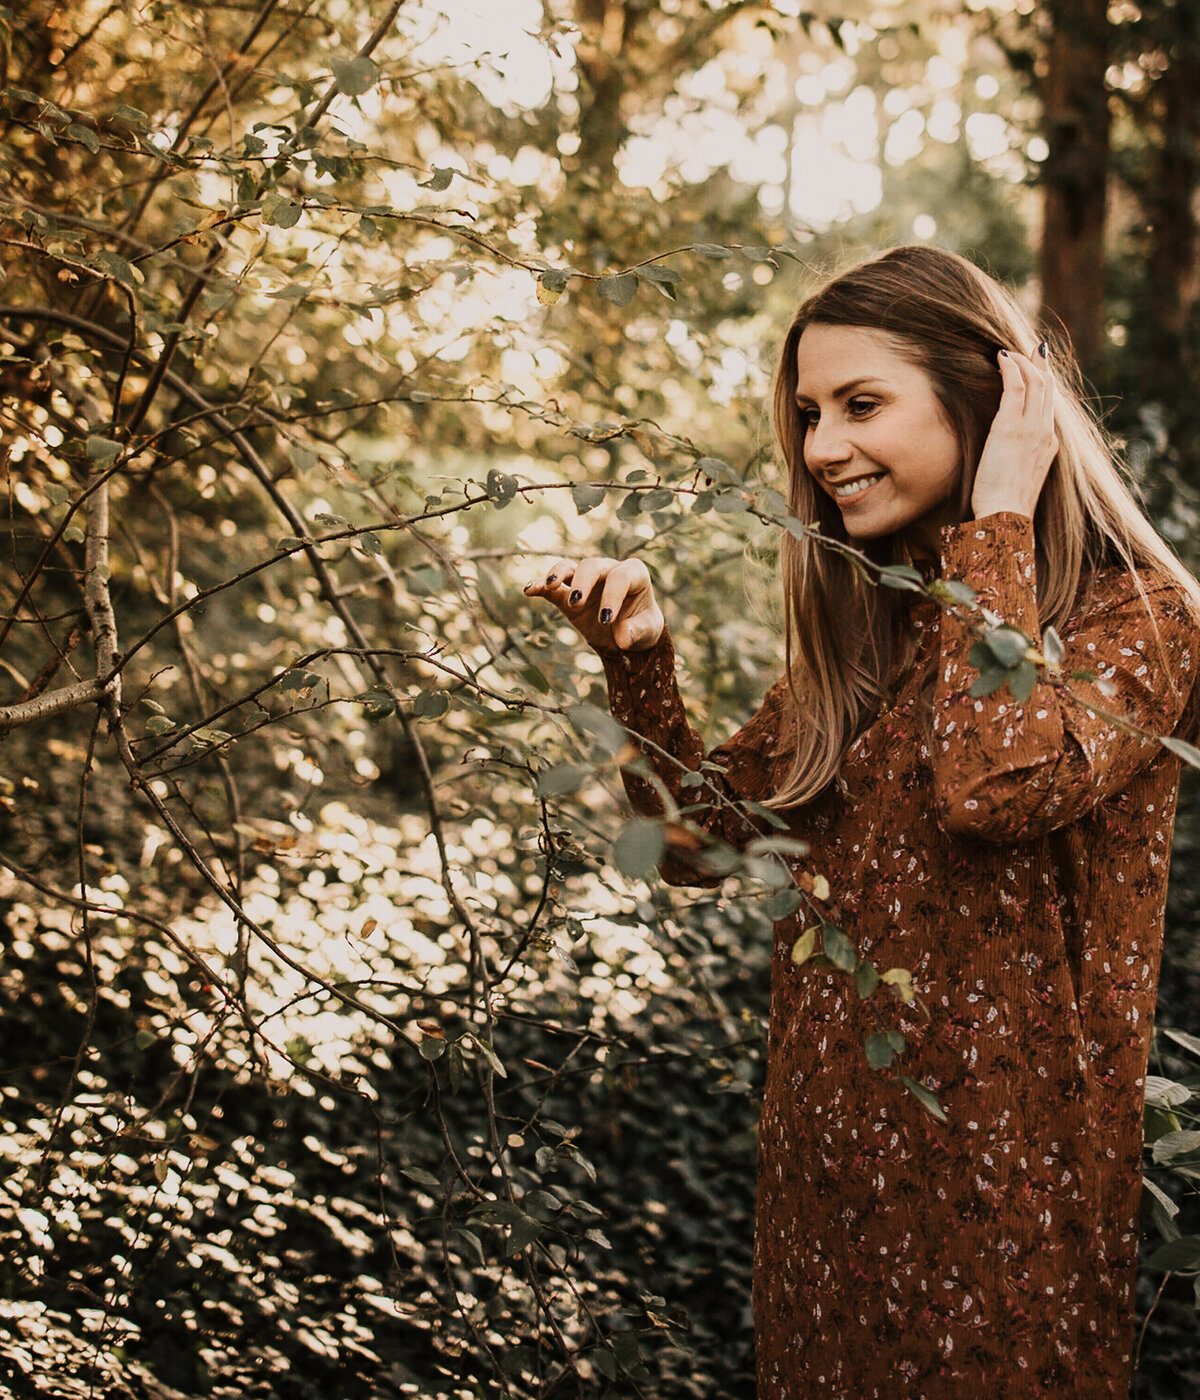 Barbora is surrounded by trees. She smiles and touches her hair